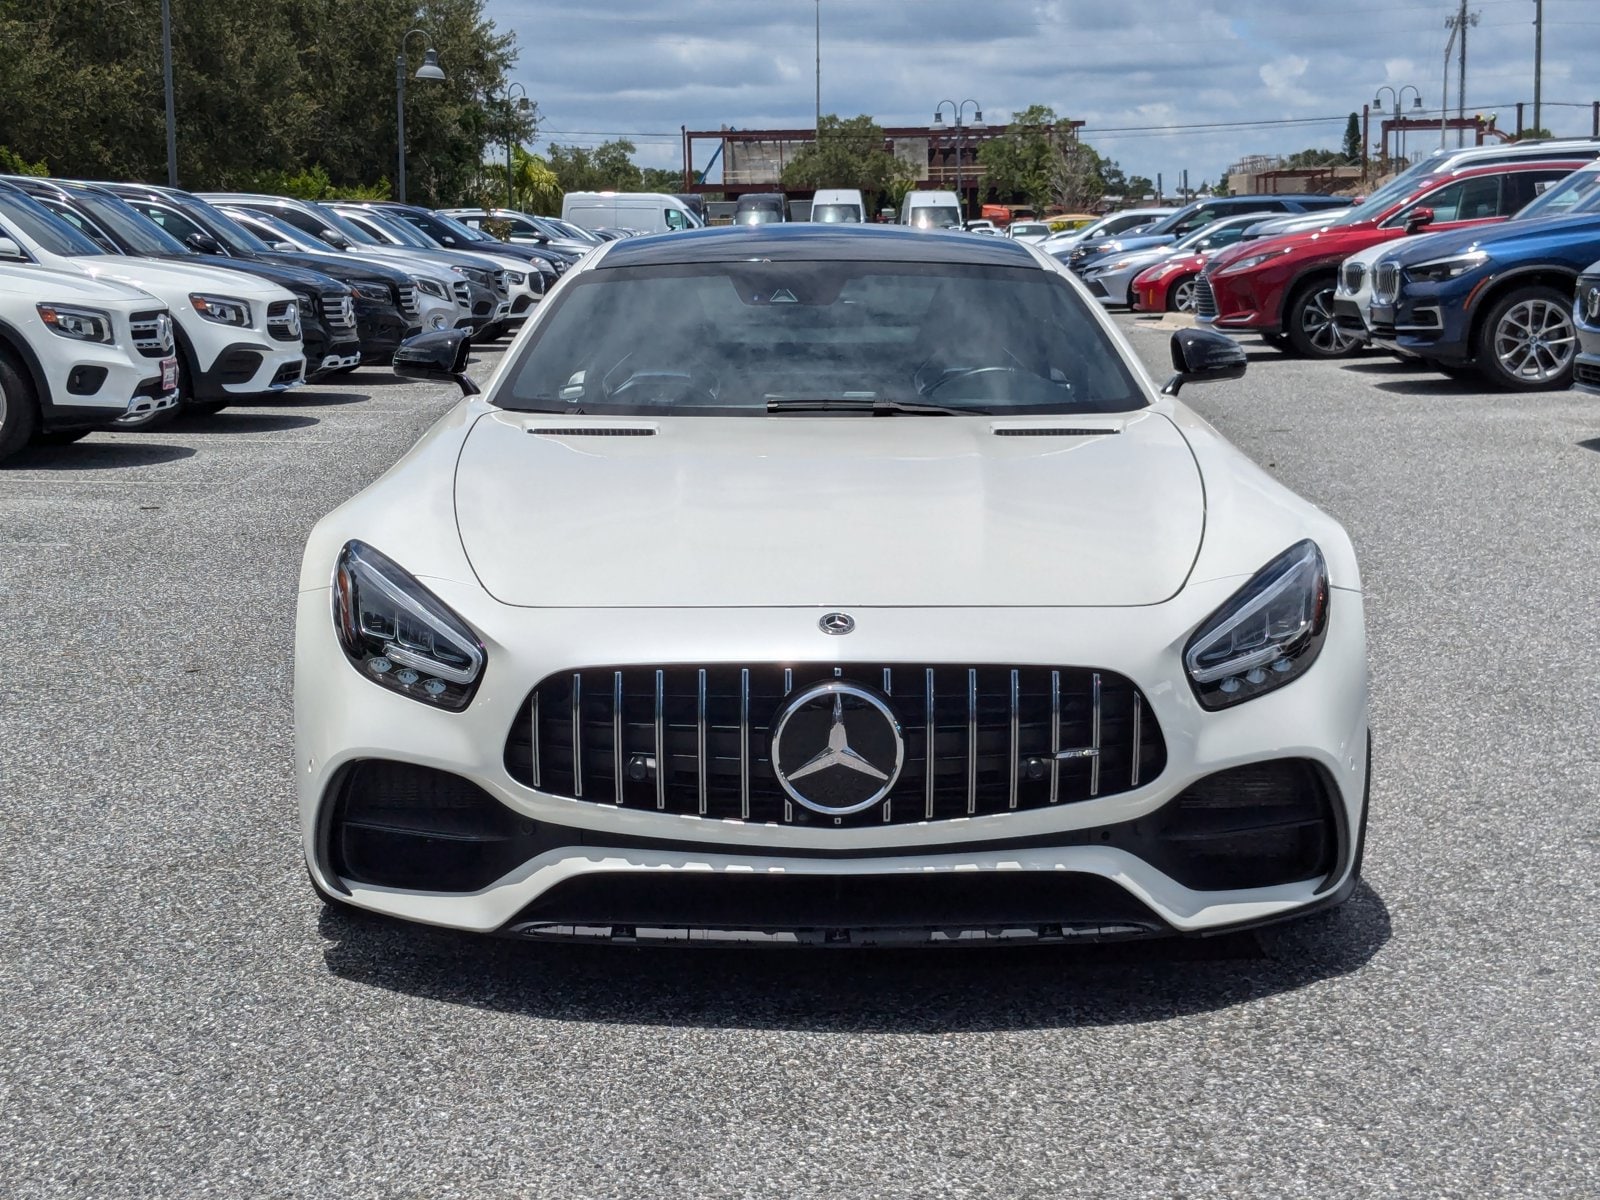 Used 2020 Mercedes-Benz AMG GT Coupe Base with VIN WDDYJ7HA0LA026334 for sale in Hardeeville, SC